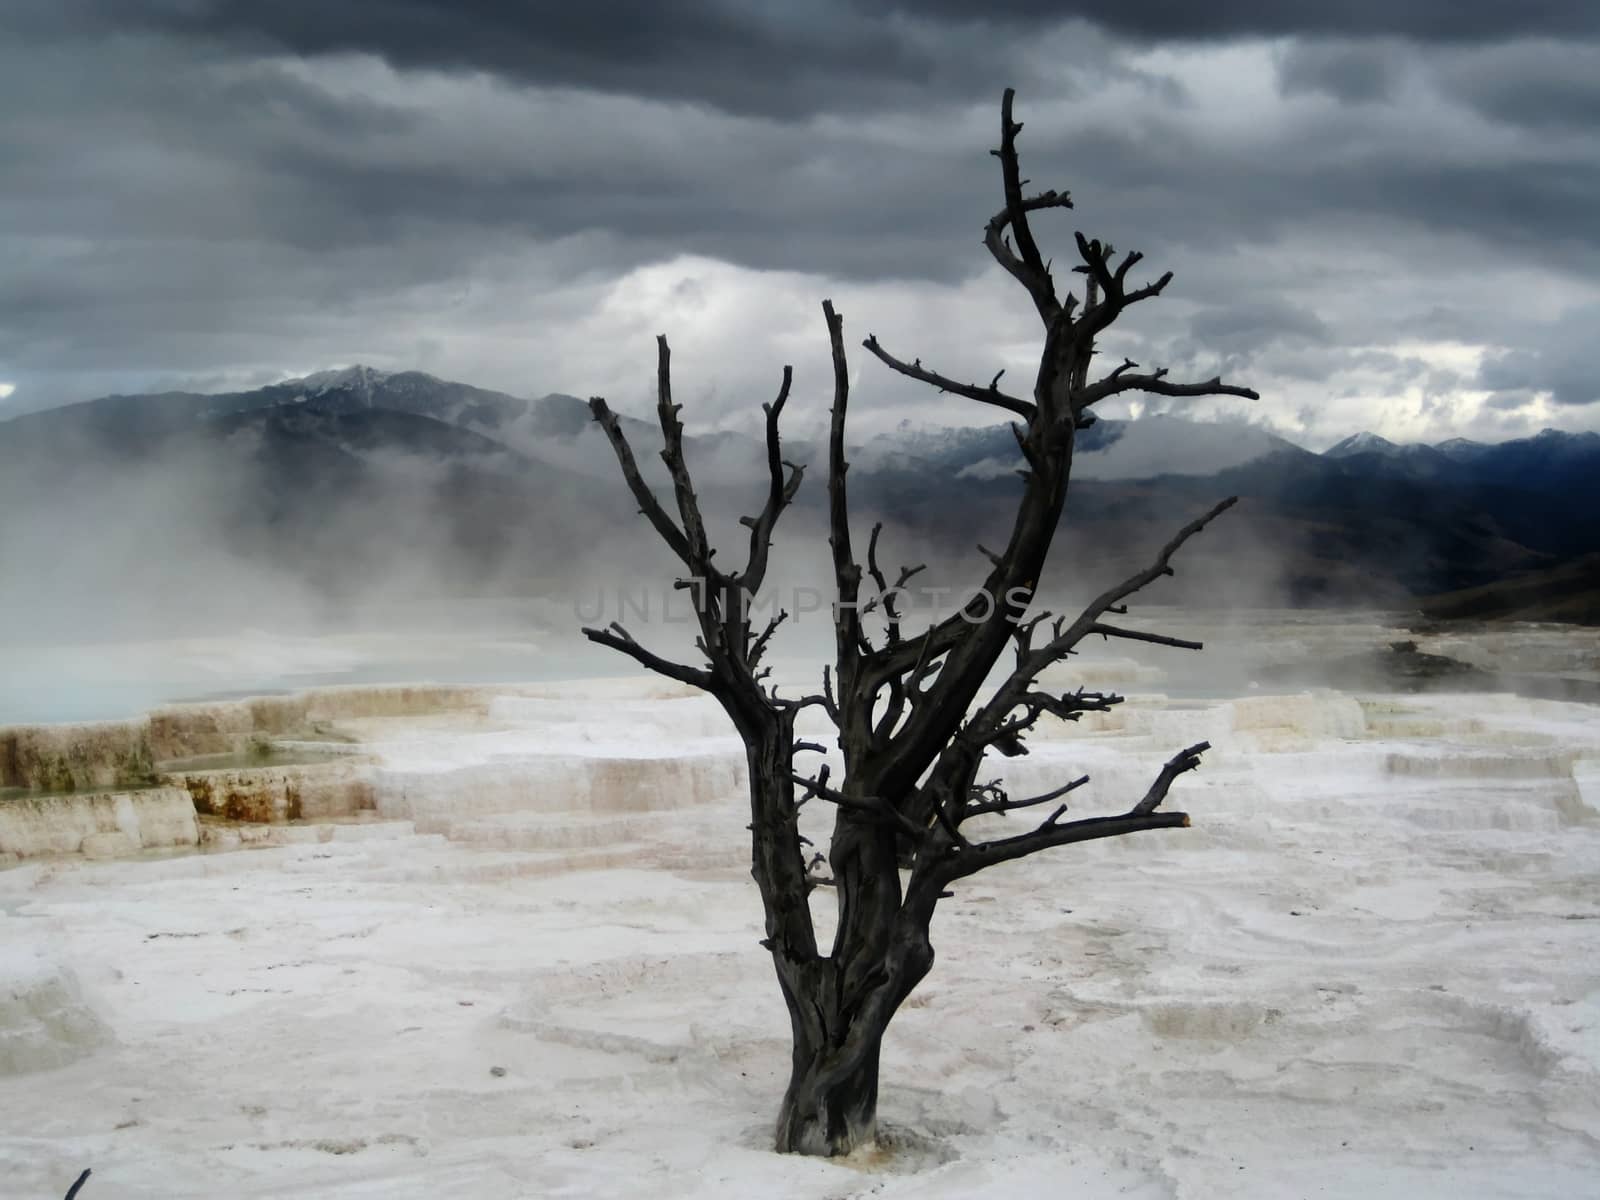 Lonely dead tree in Mammoth Hot Springs (Yellowstone, Wyoming, USA). The dark clouds mixed with the water vapour contributed to intensify this apocalytic landscape.